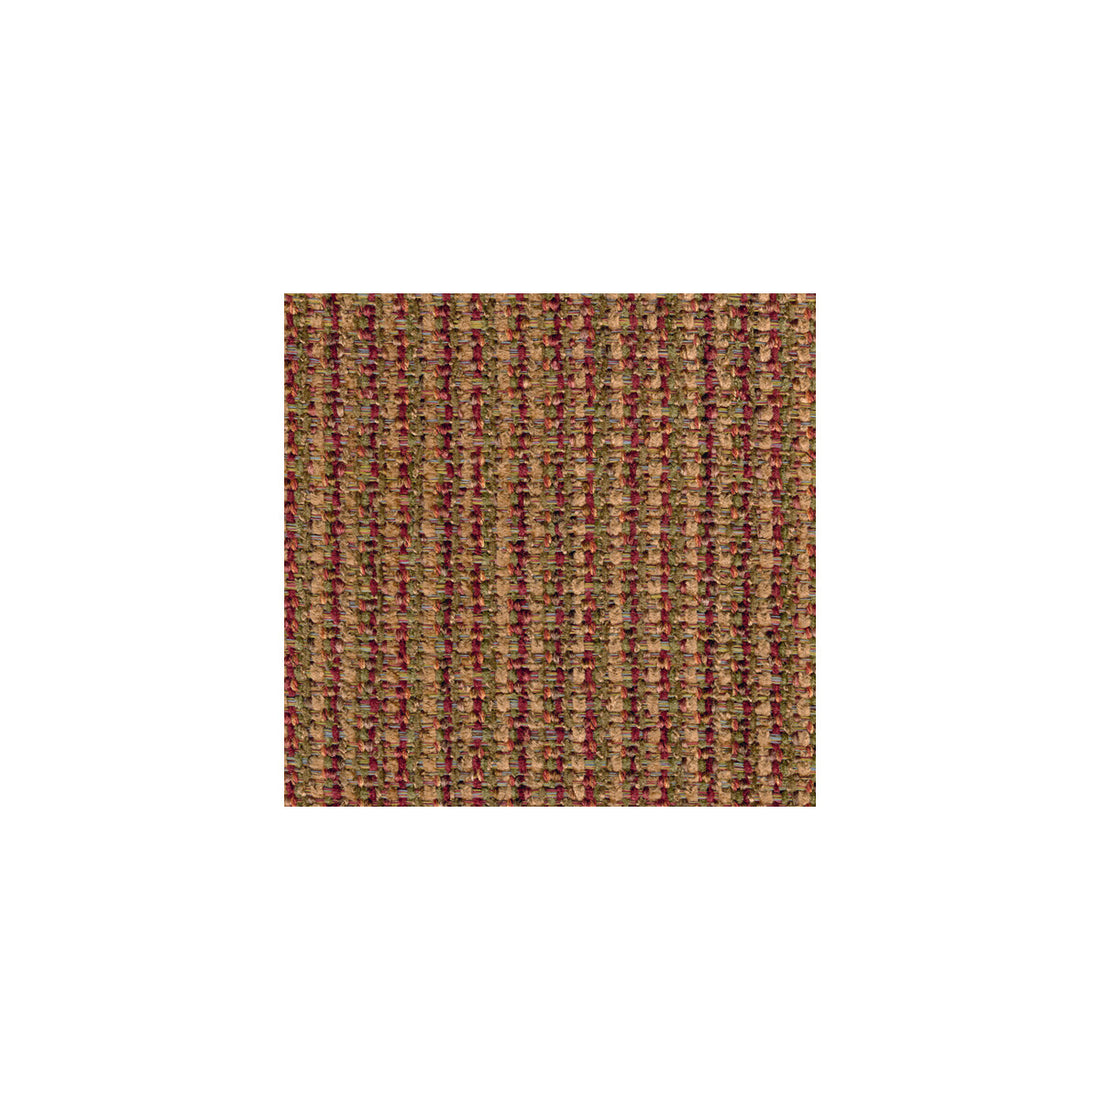 Chenille Tweed fabric in autumn color - pattern 30962.319.0 - by Kravet Smart in the Gis collection